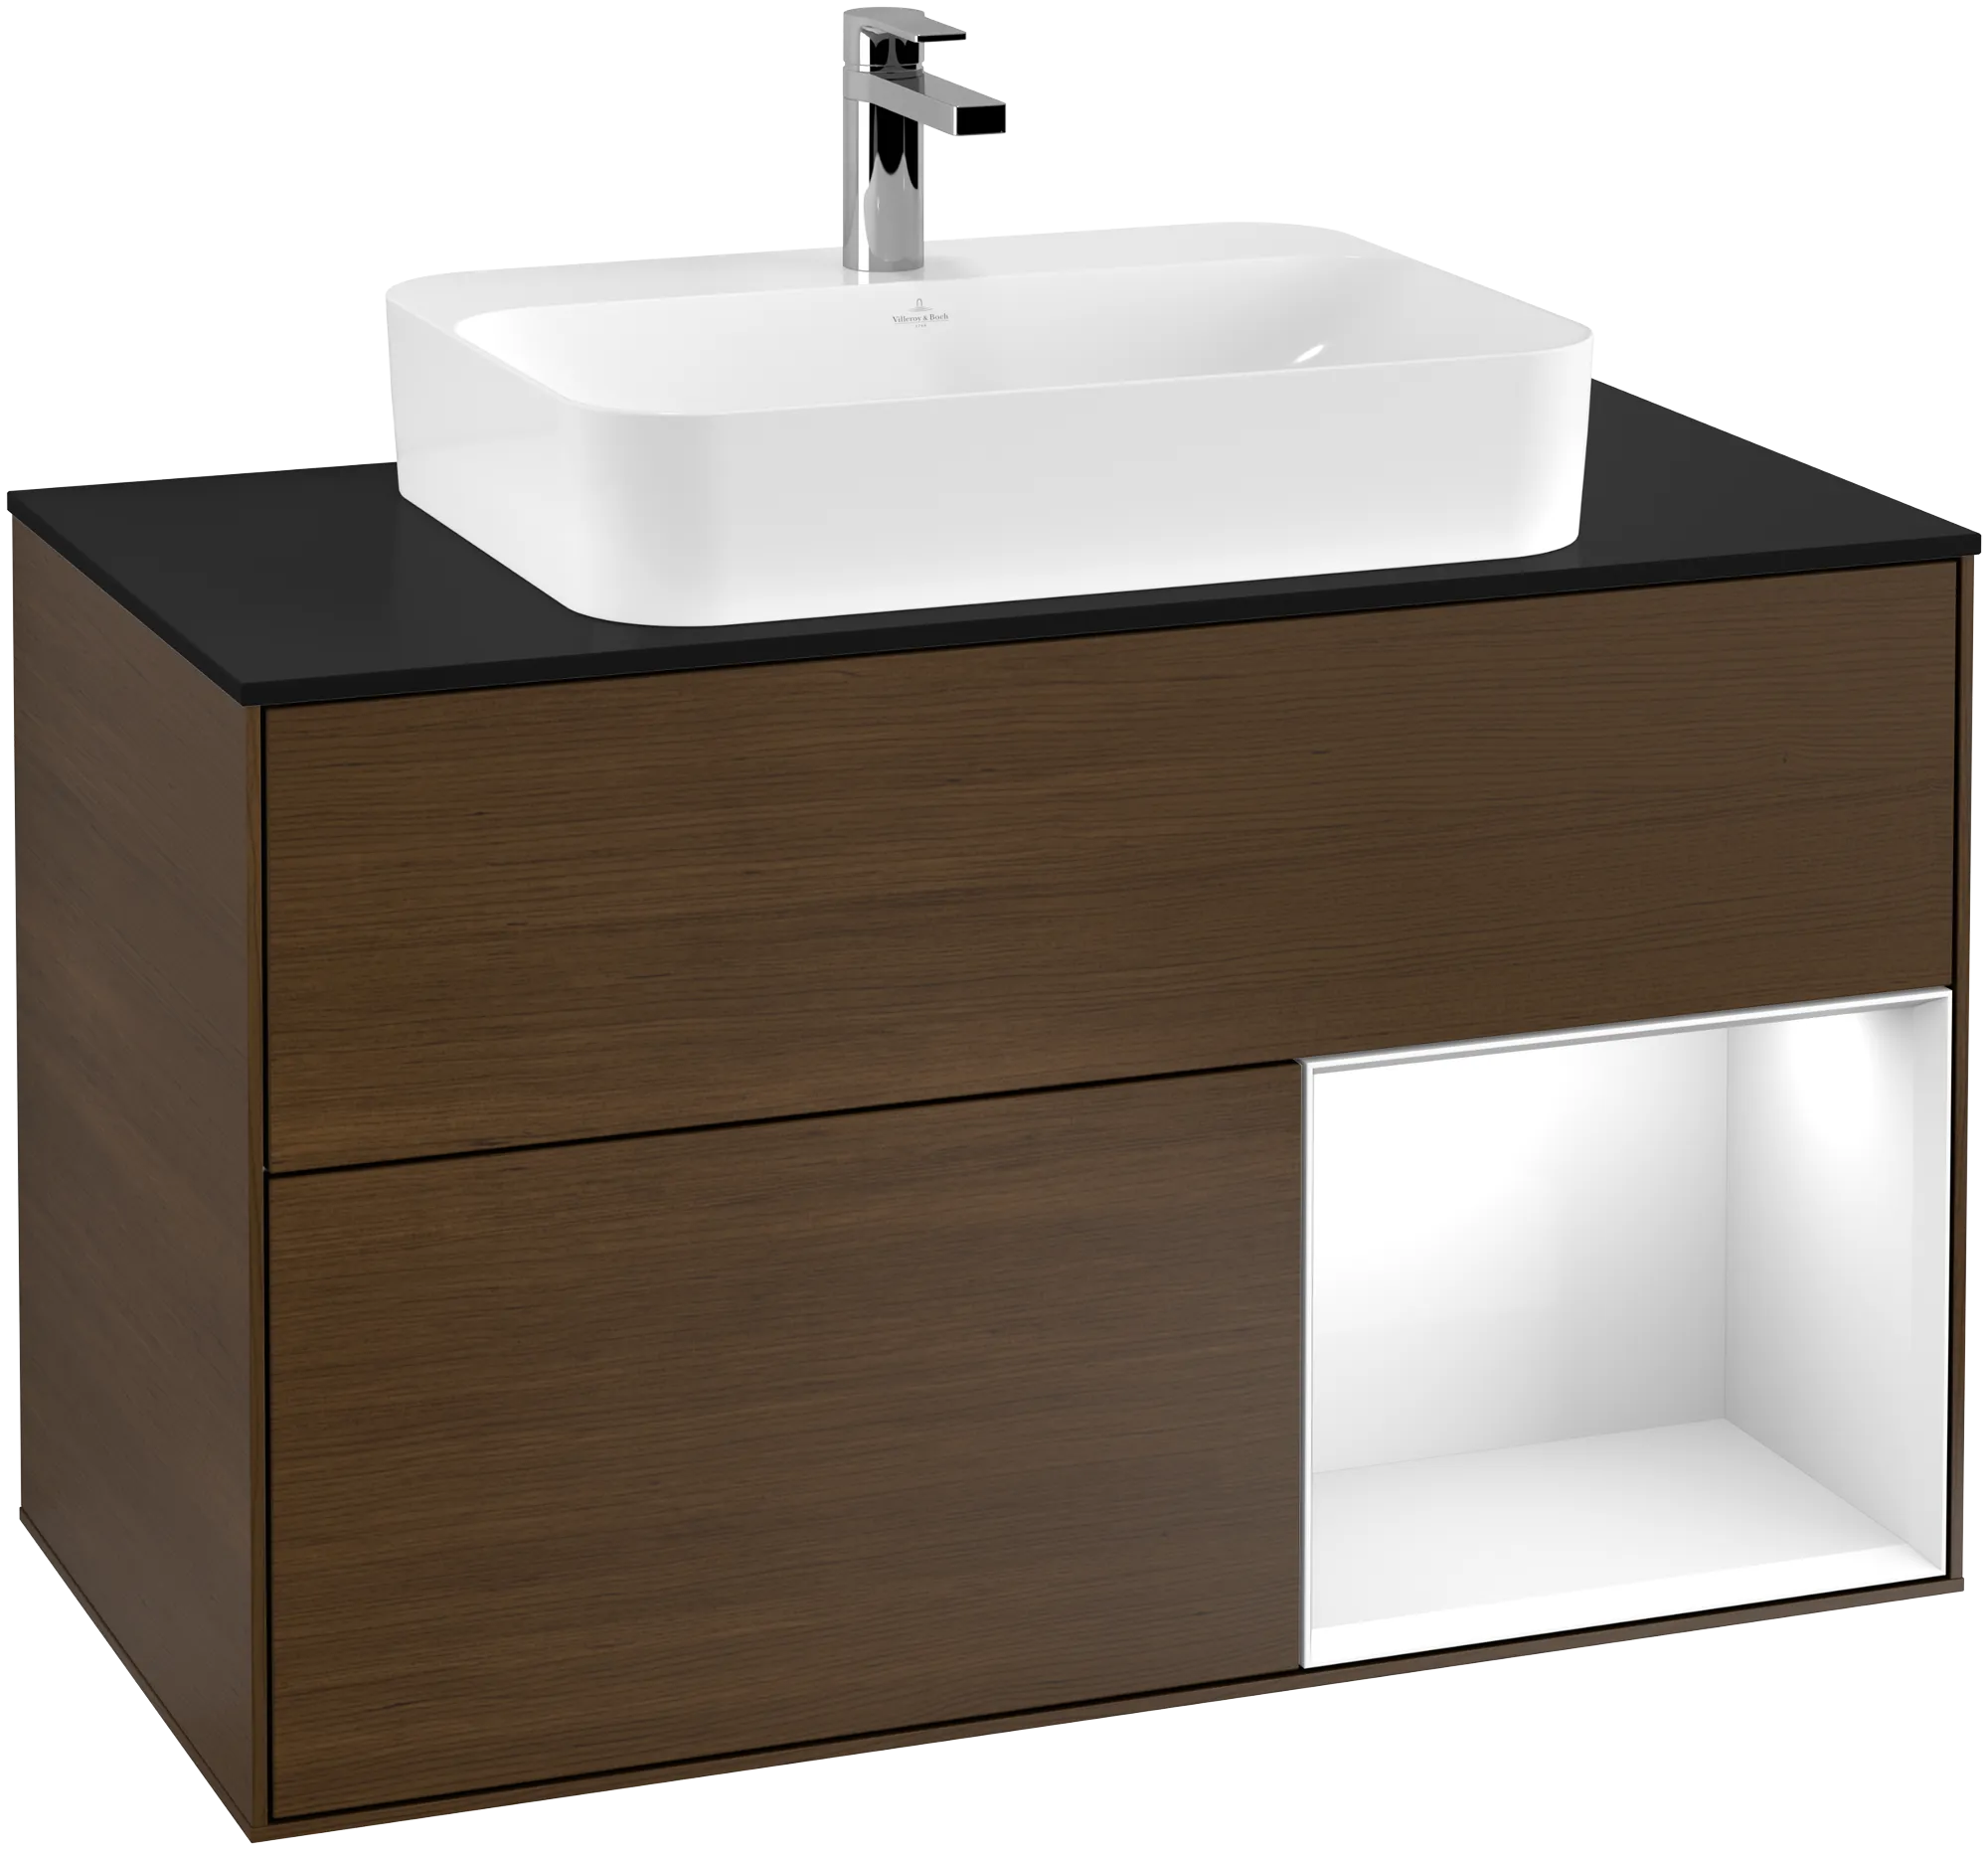 VILLEROY BOCH Finion Vanity unit, with lighting, 2 pull-out compartments, 1000 x 603 x 501 mm, Walnut Veneer / Glossy White Lacquer / Glass Black Matt #G372GFGN resmi